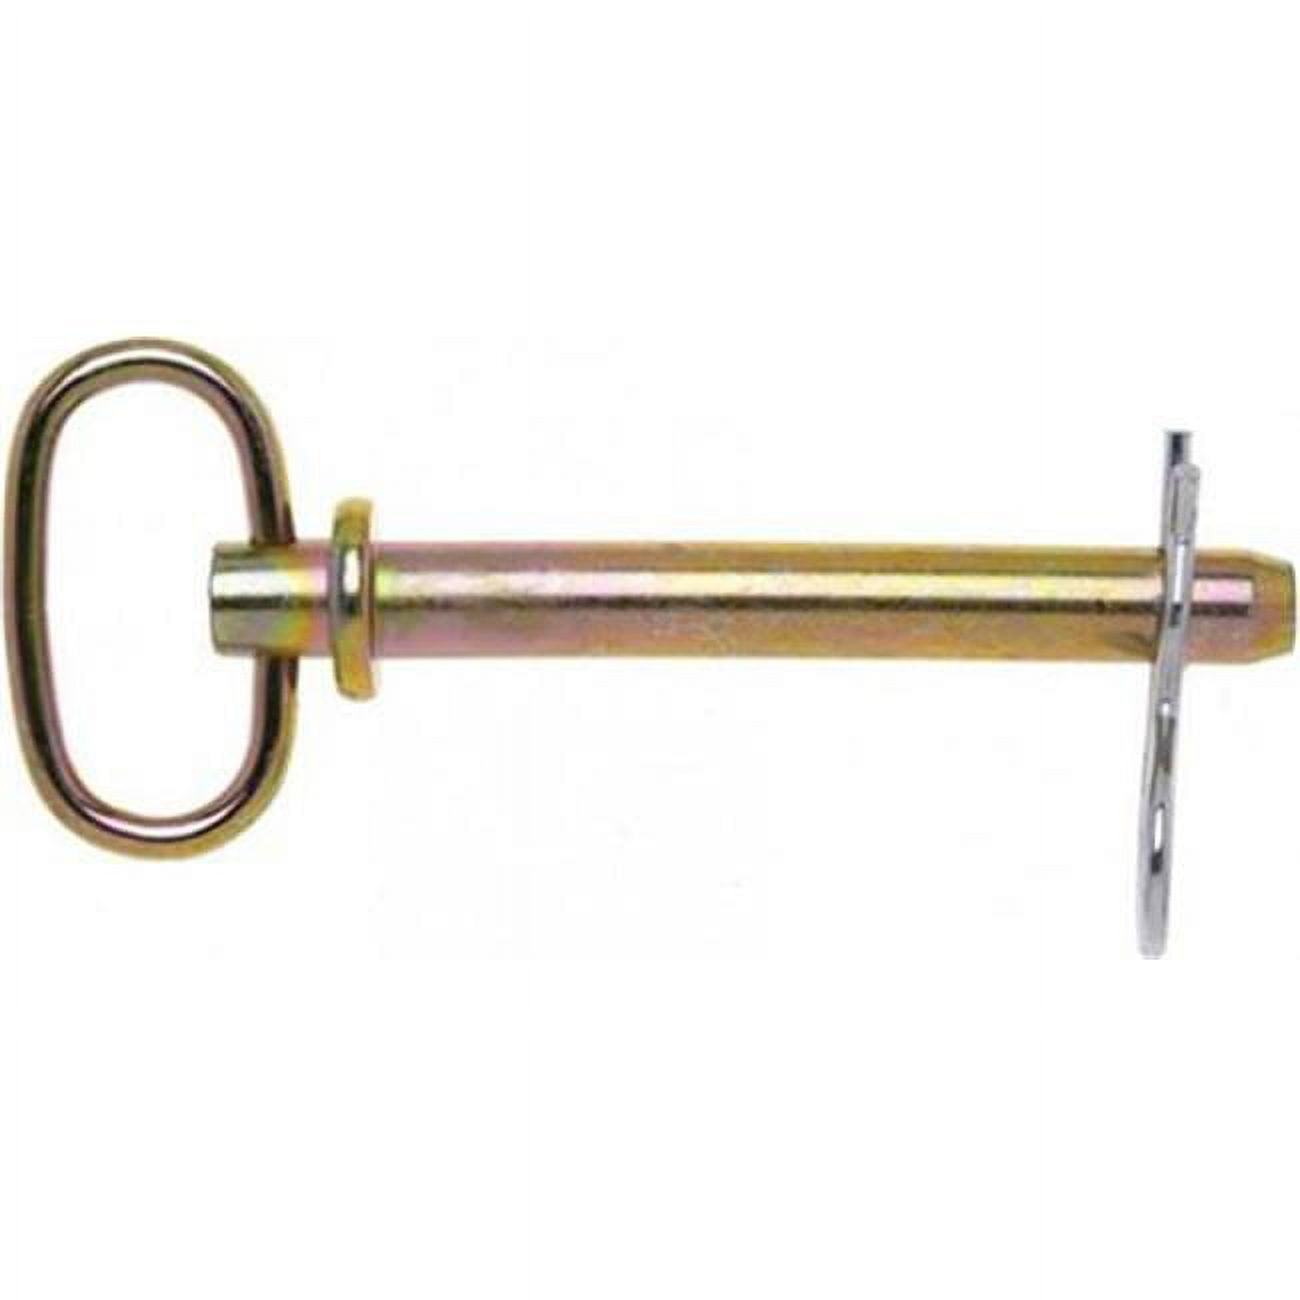 B3899814 0.25 In. Campbell Hitch Pin With Clip, Yellow Zinc Plated - 2 Per Bag